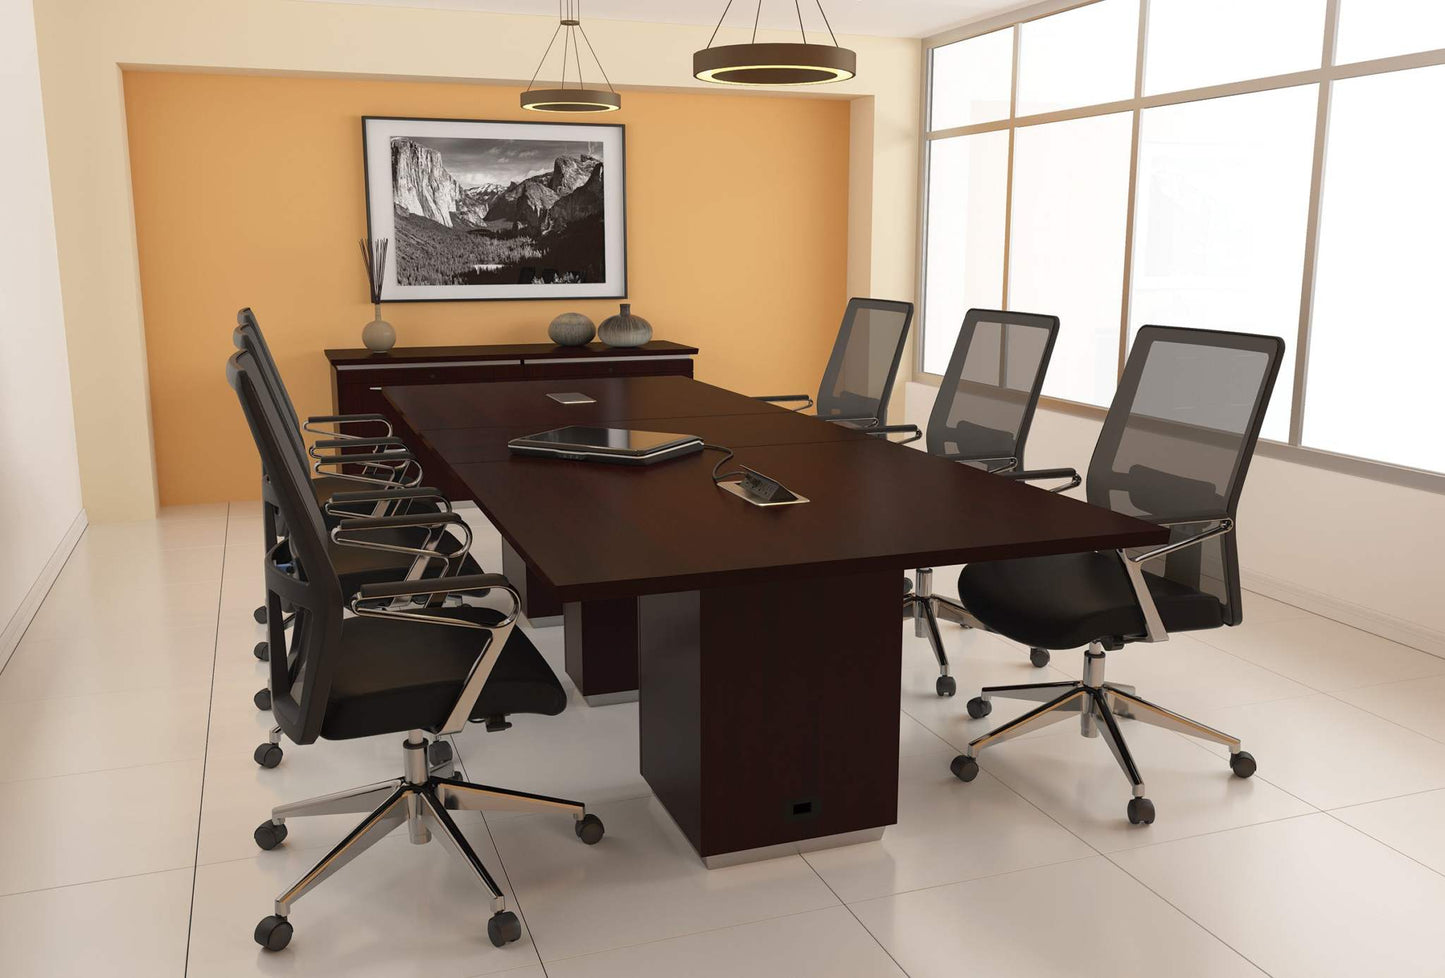 New Tuxedo Series 8' Rectangular Conference Table by Office Star